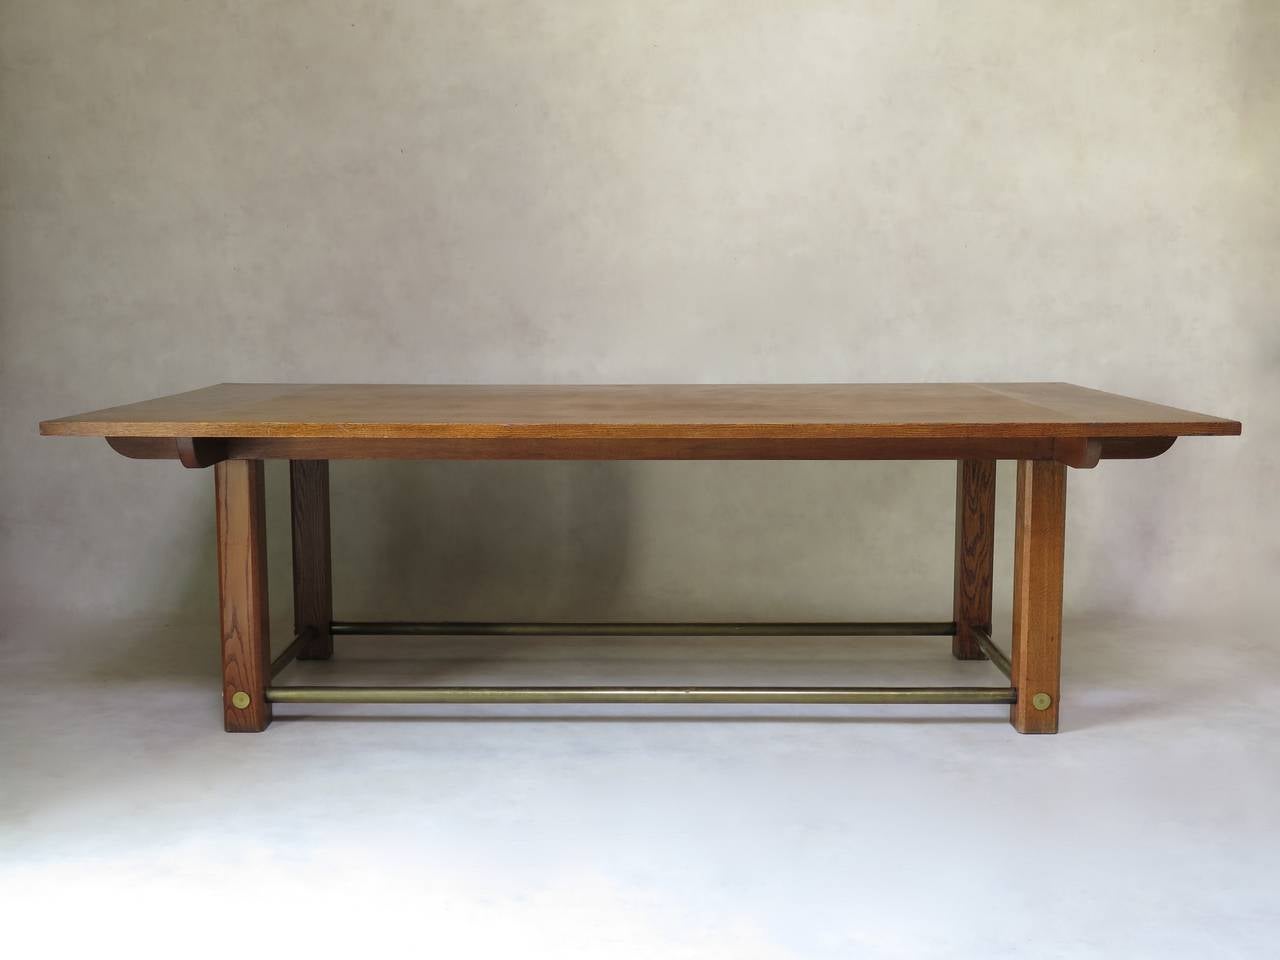 20th Century Large Oak and Brass Table, France, circa 1950s